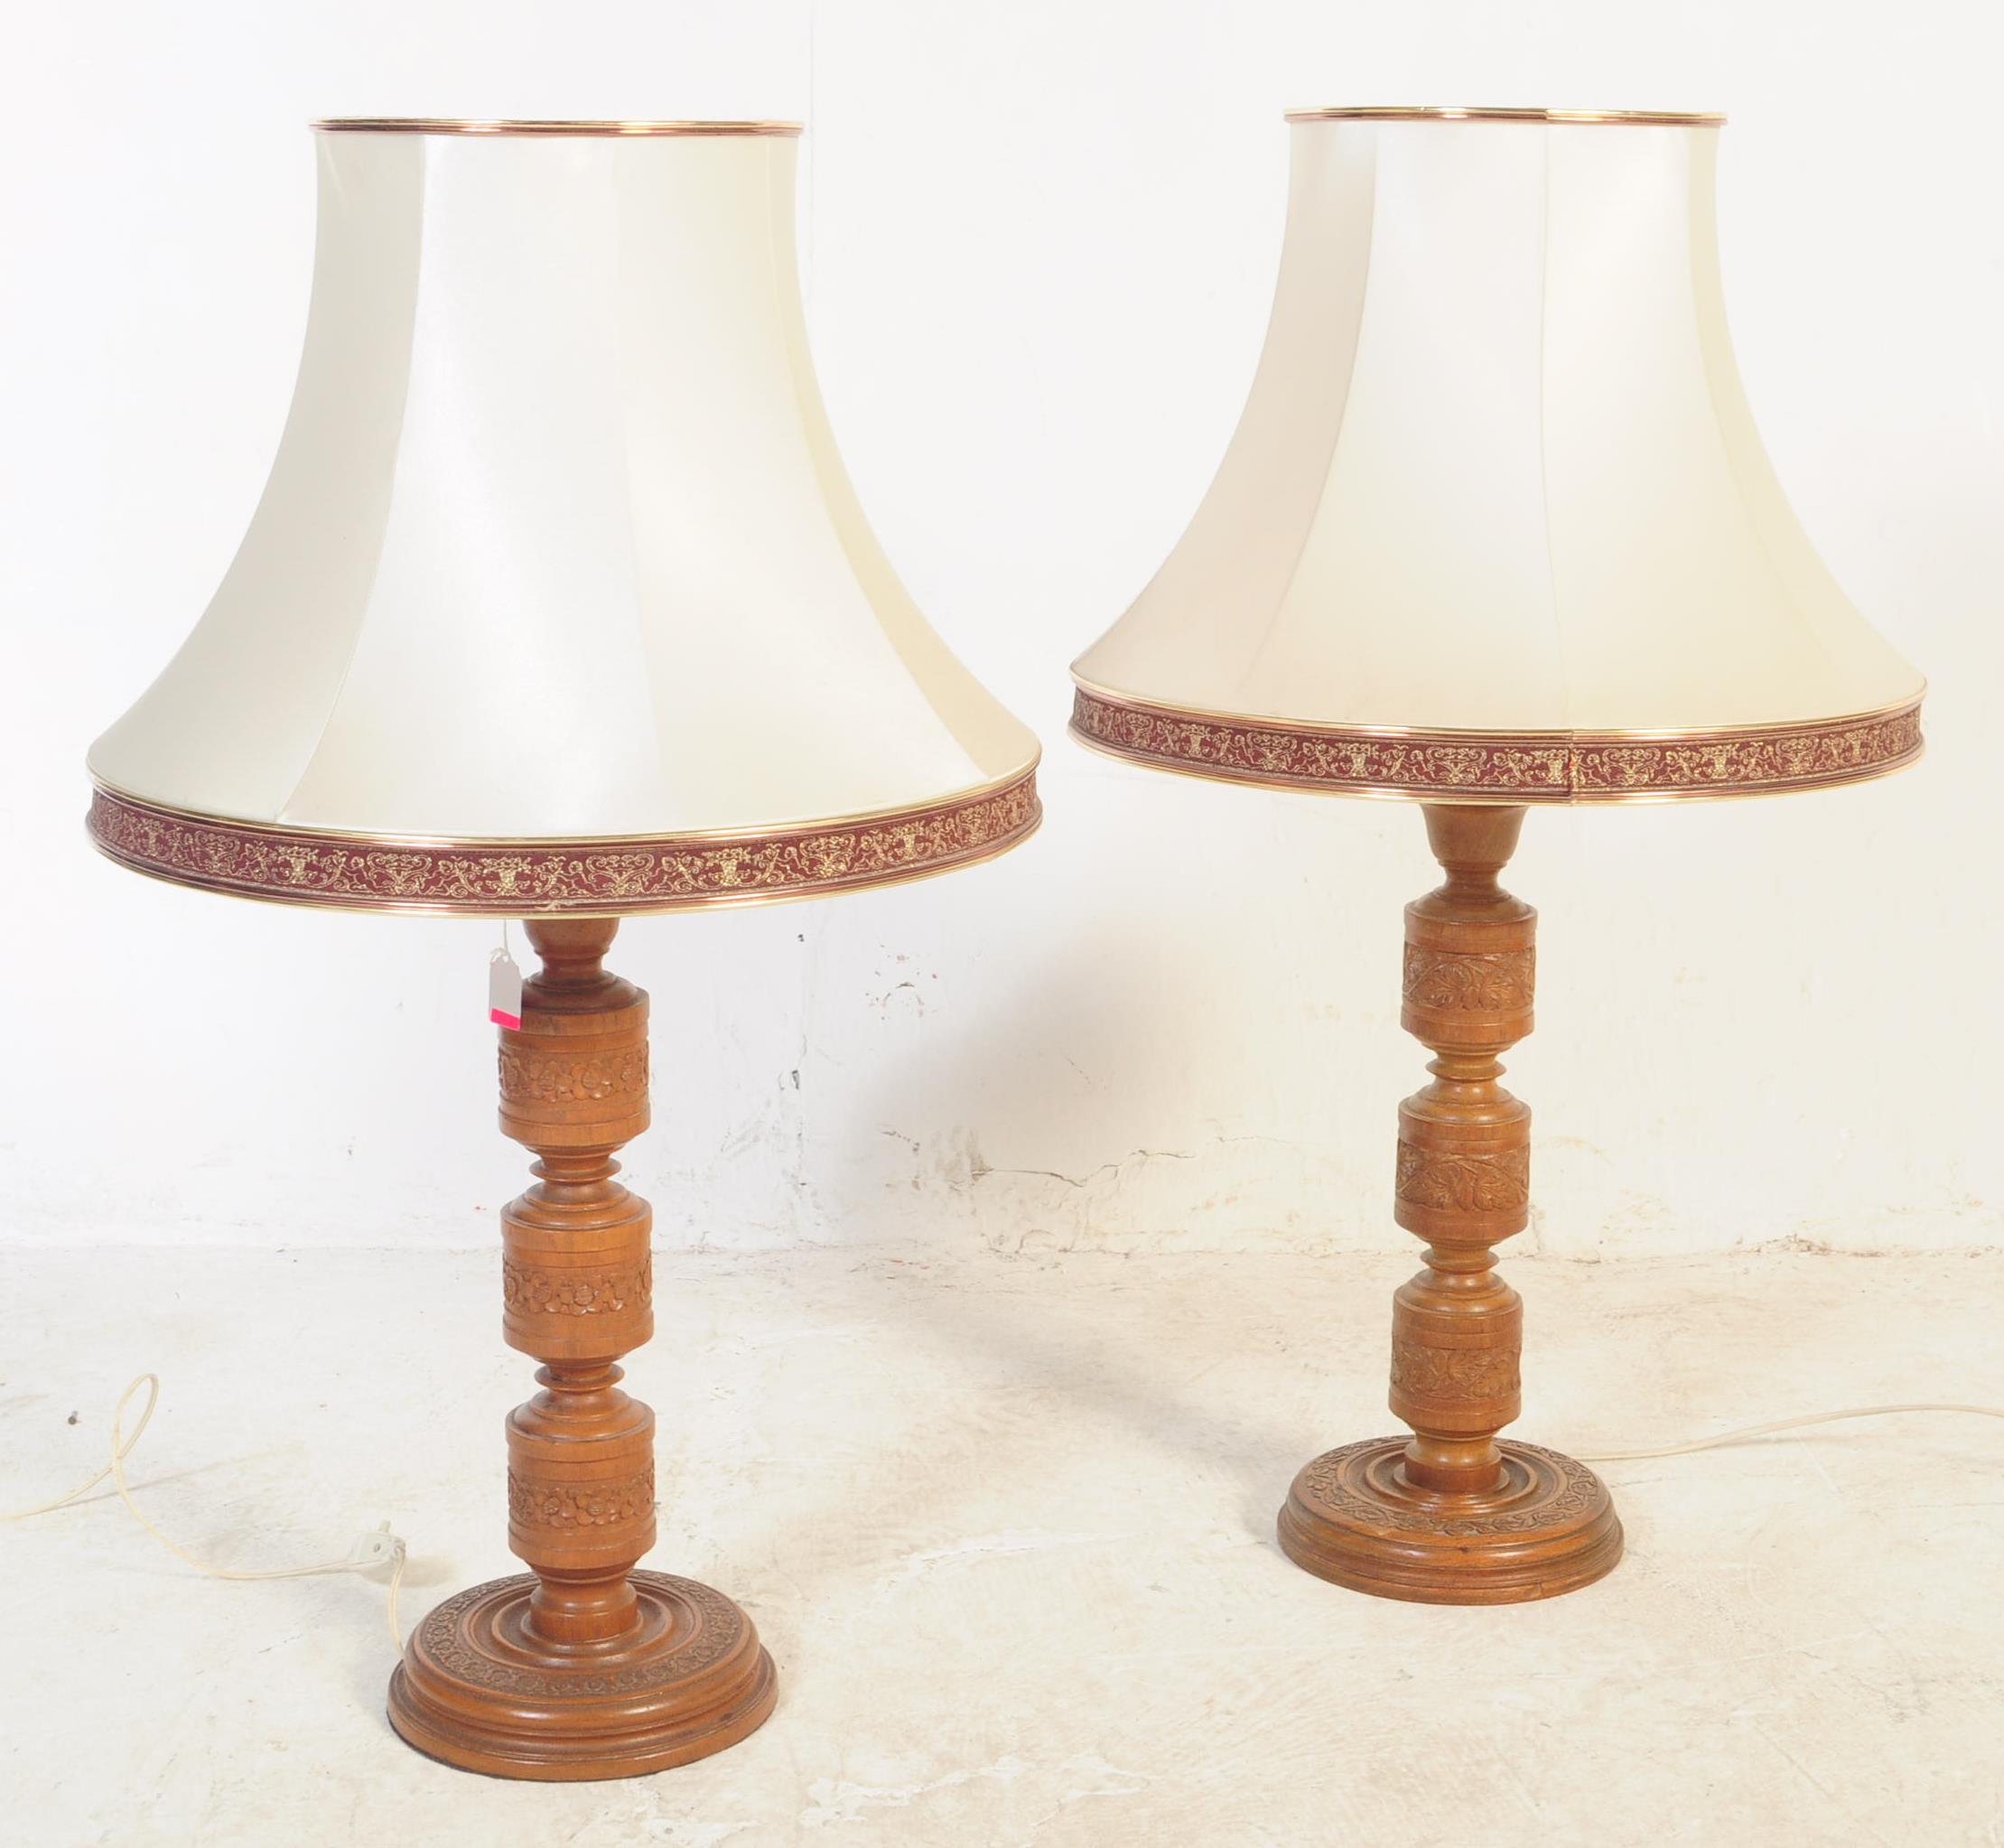 PAIR OF LARGE 20TH CENTURY WOODEN CARVED TABLE LAMPS